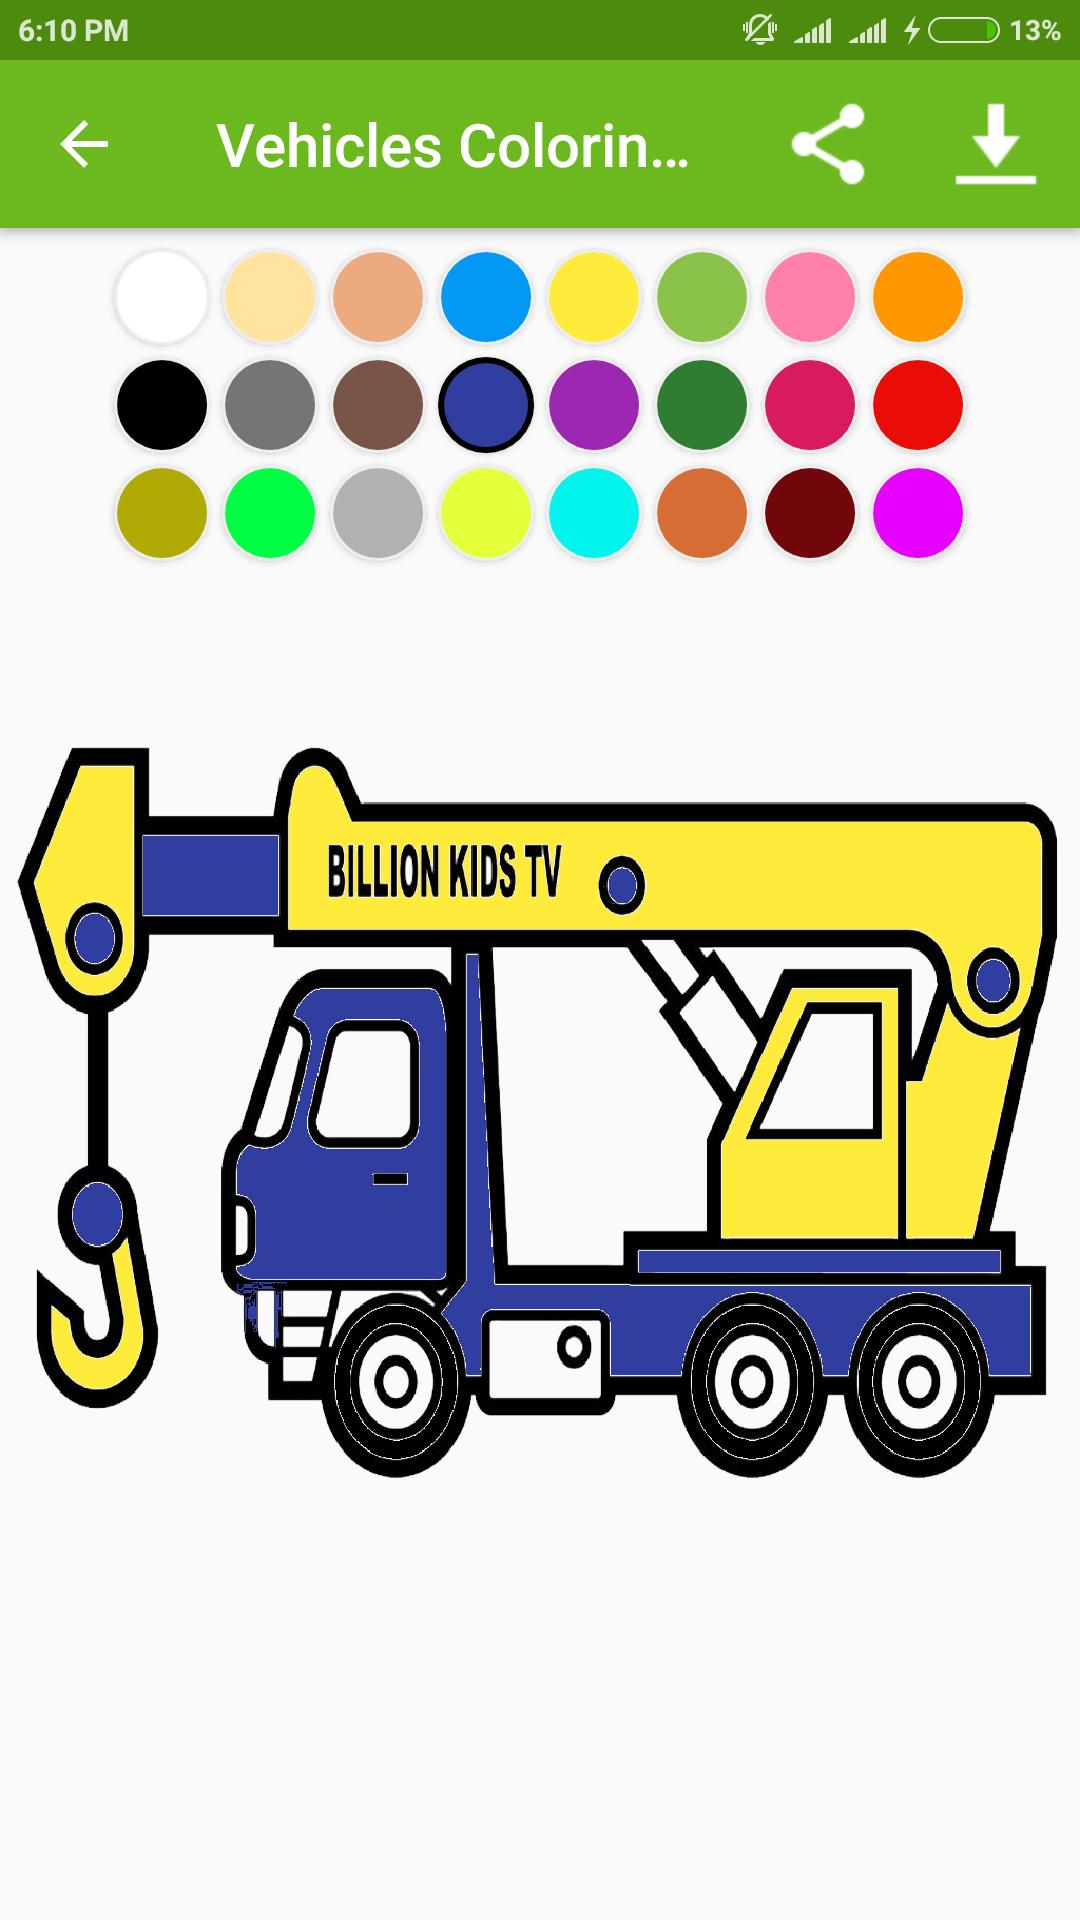 Vehicles Coloring Pages for Kids for Android - APK Download